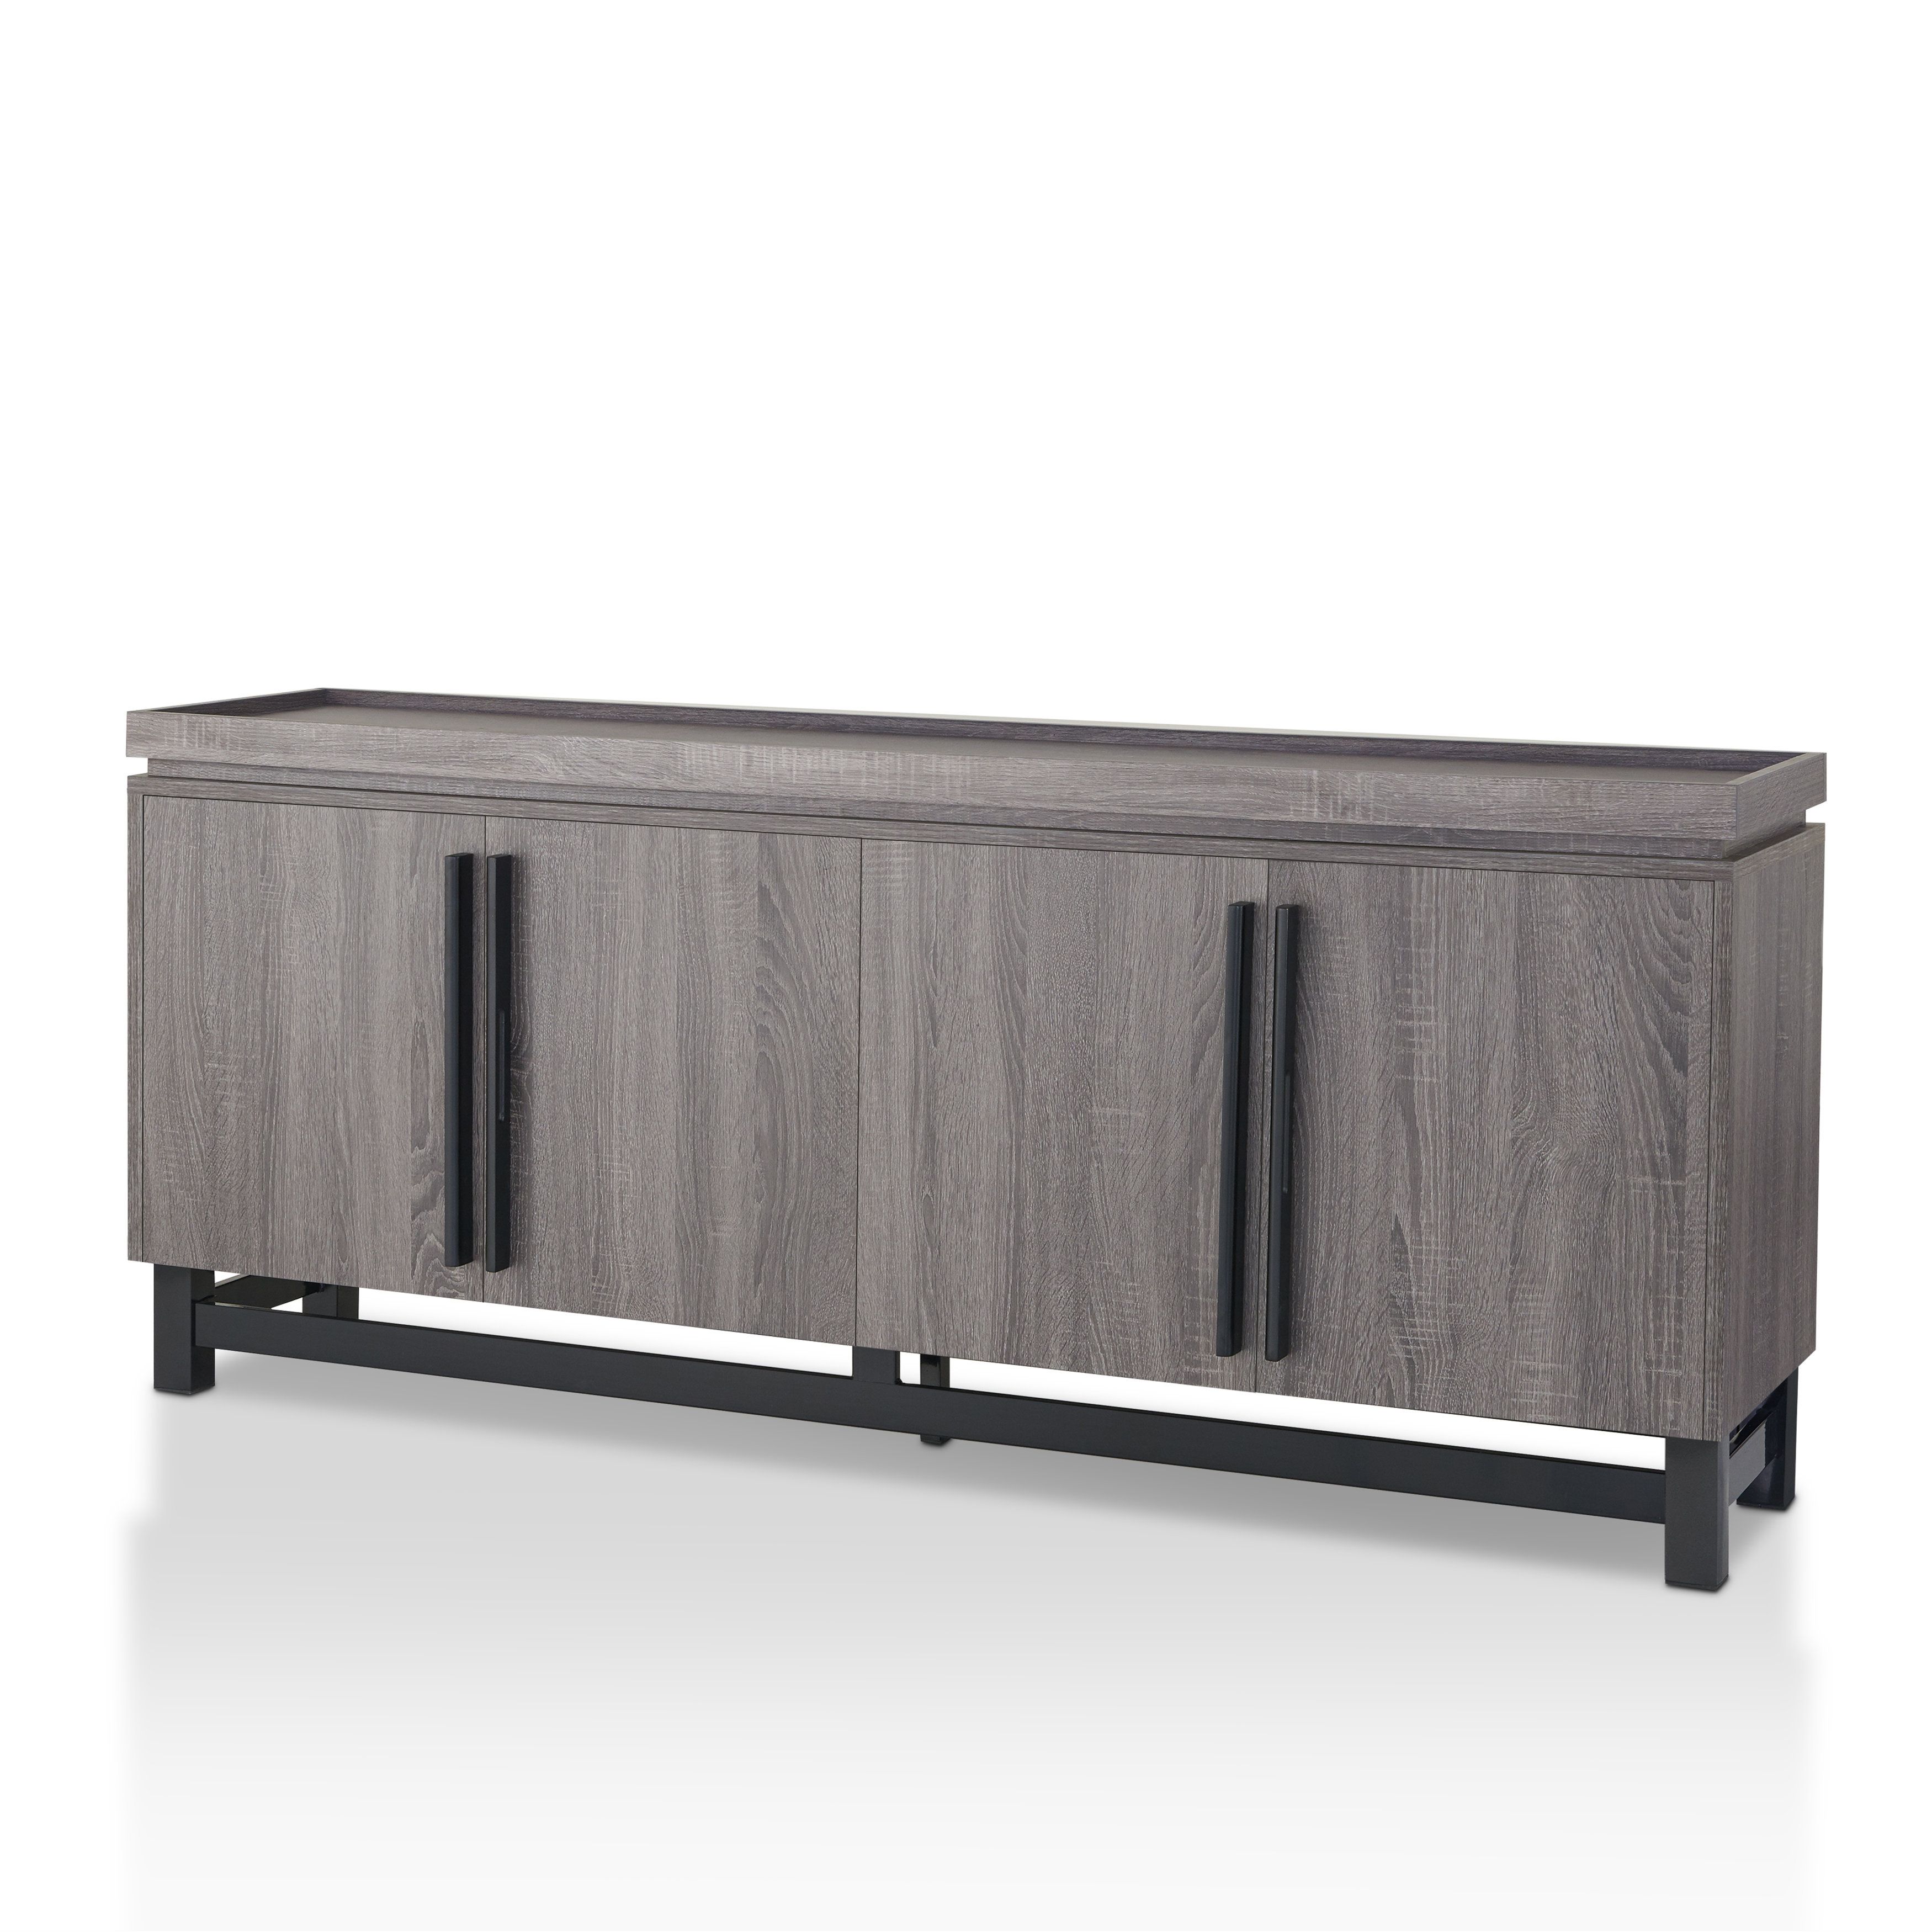 Modern Grey Sideboards + Buffets | Allmodern Pertaining To Contemporary Style Wooden Buffets With Two Side Door Storage Cabinets (View 13 of 30)